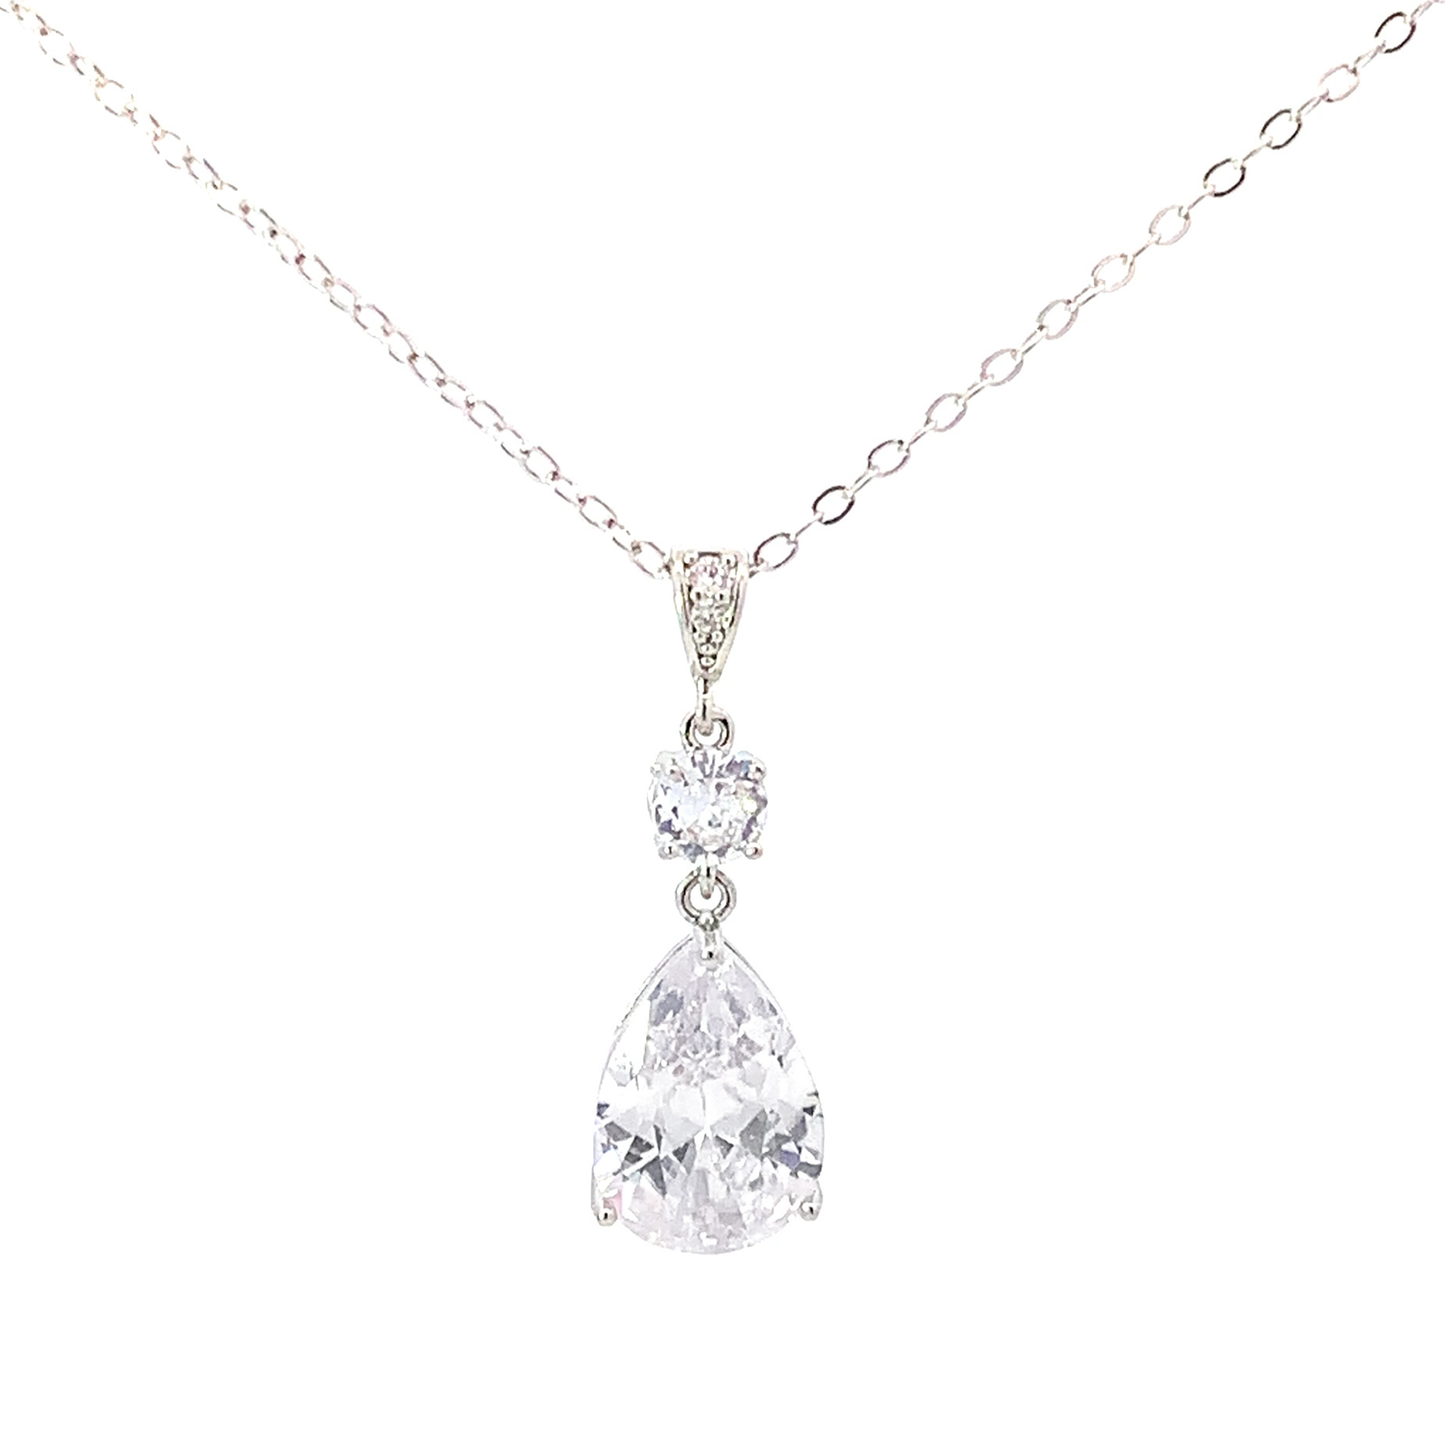 Crystal pear bridal pendant necklace silver